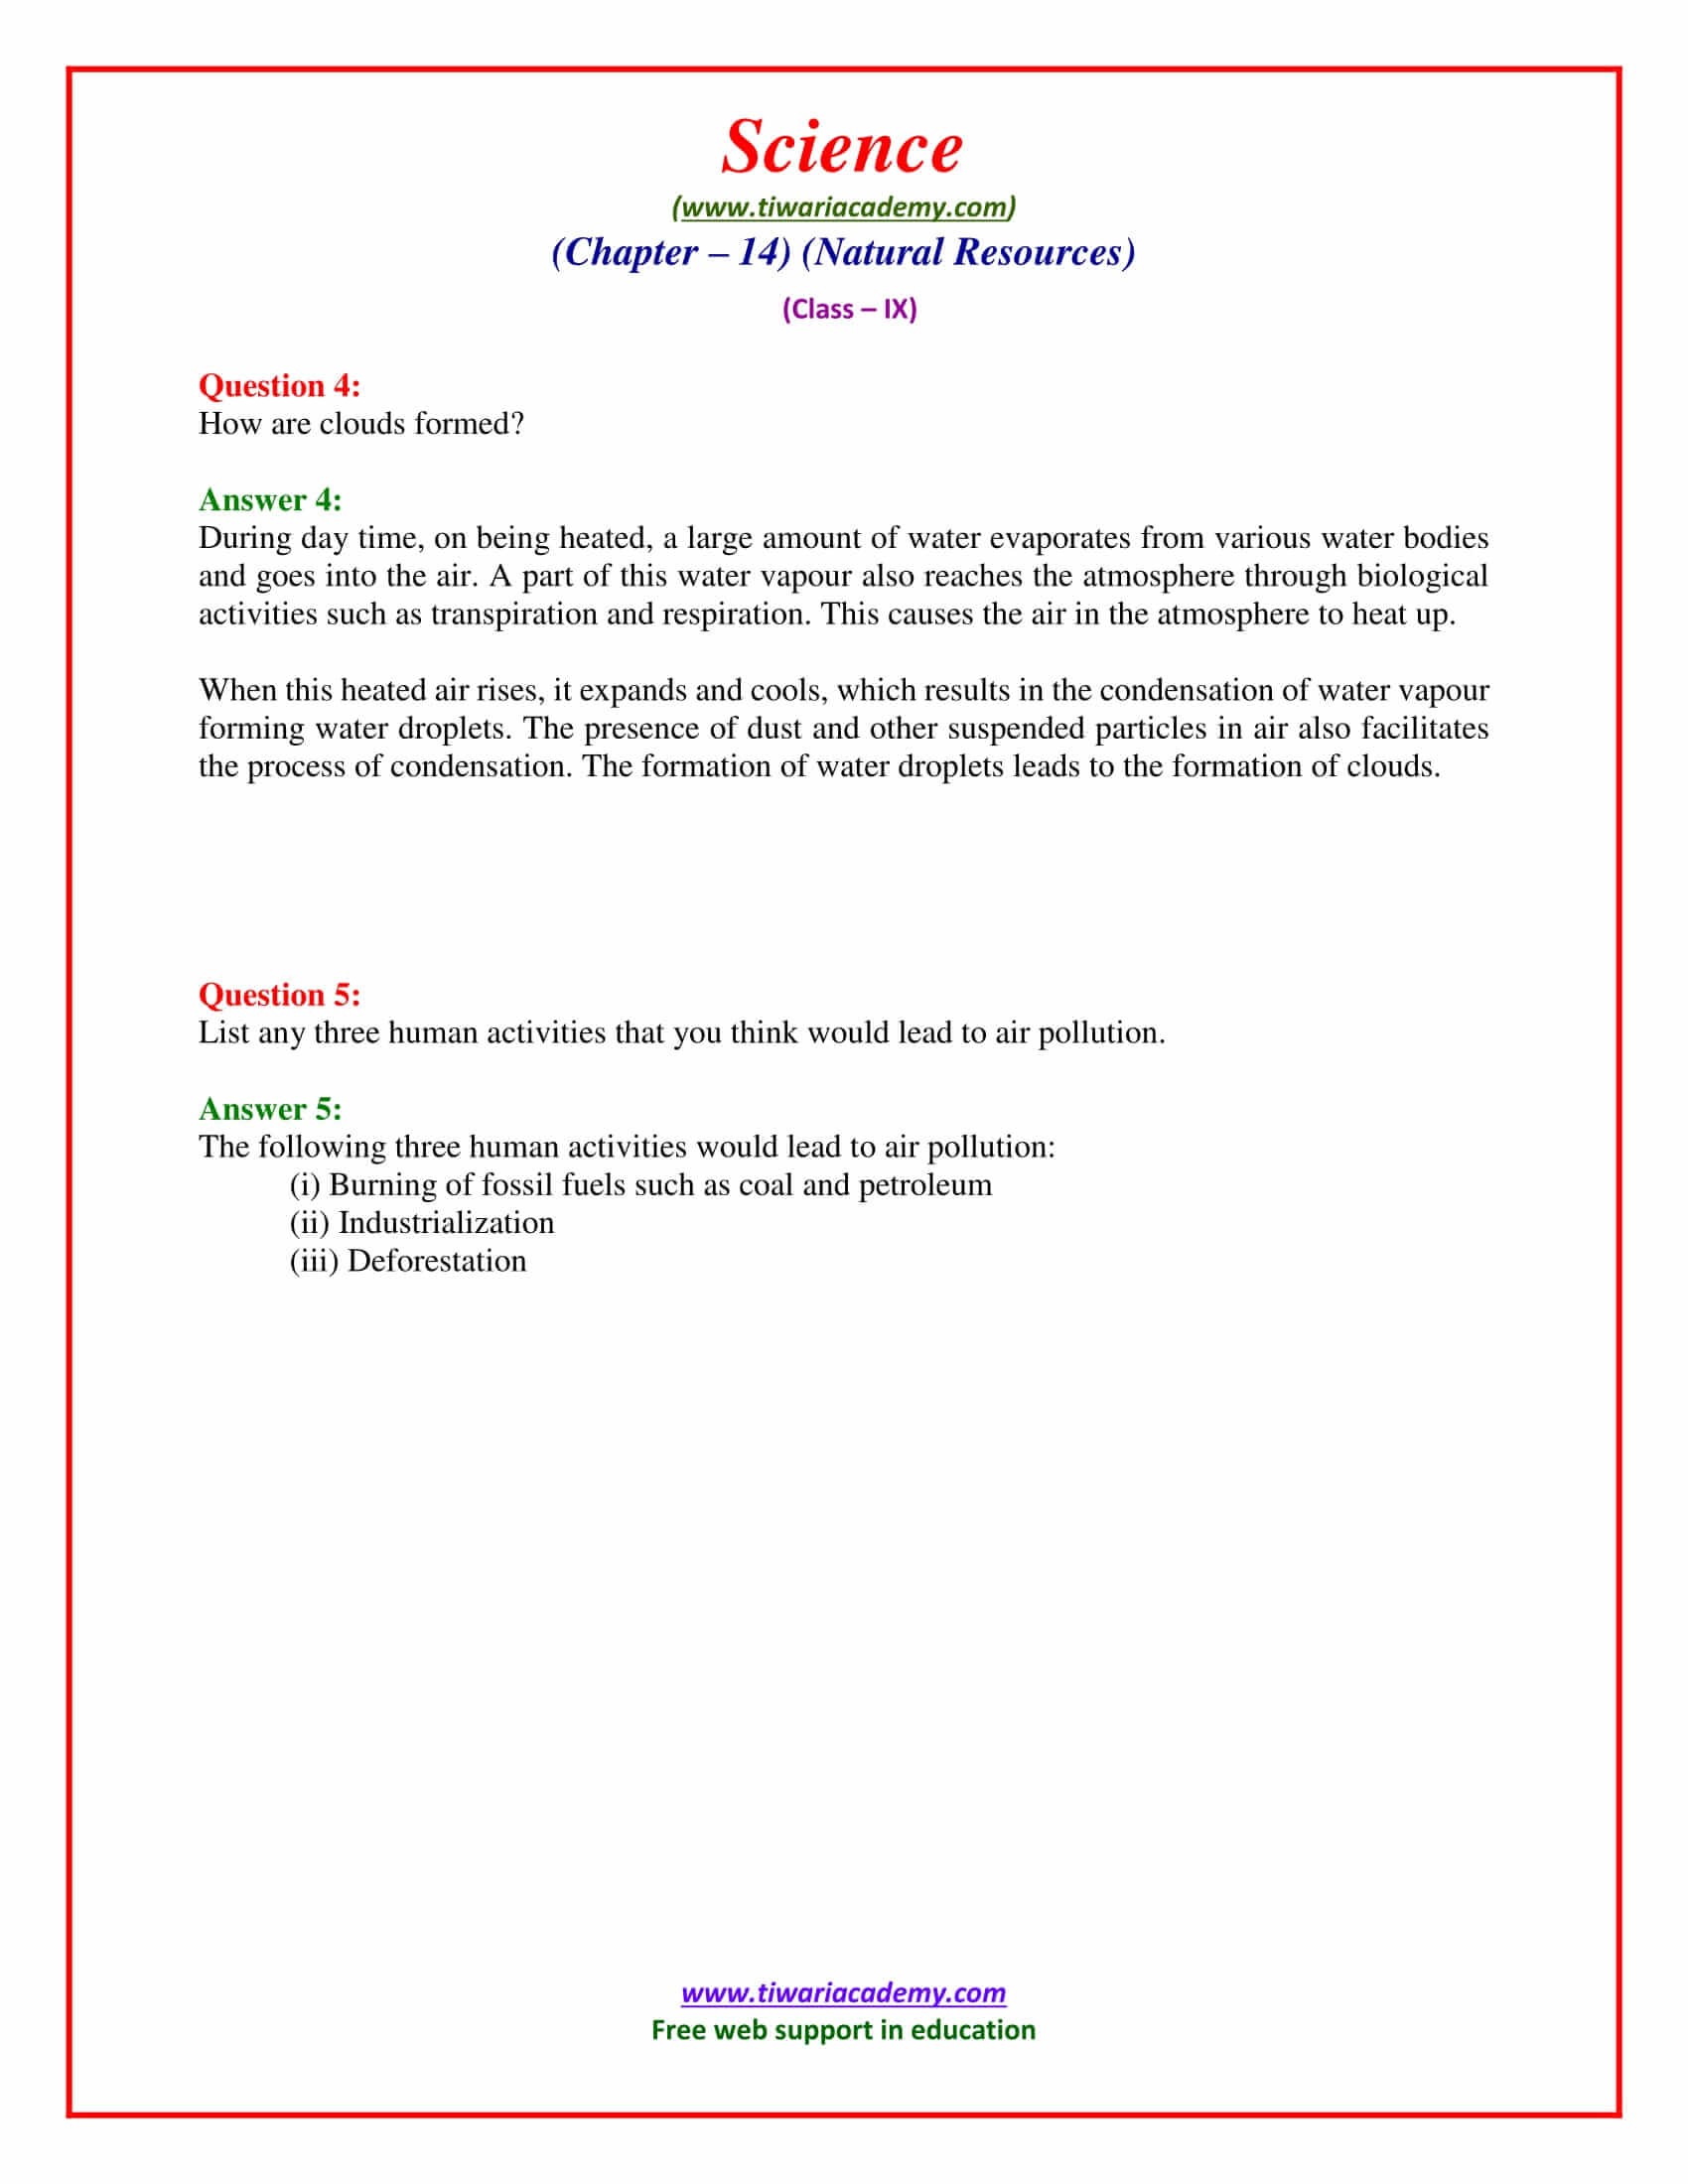 NCERT Solutions for Class 9 Science Chapter 14 Natural Resources Intext Questions Page 193 in PDF